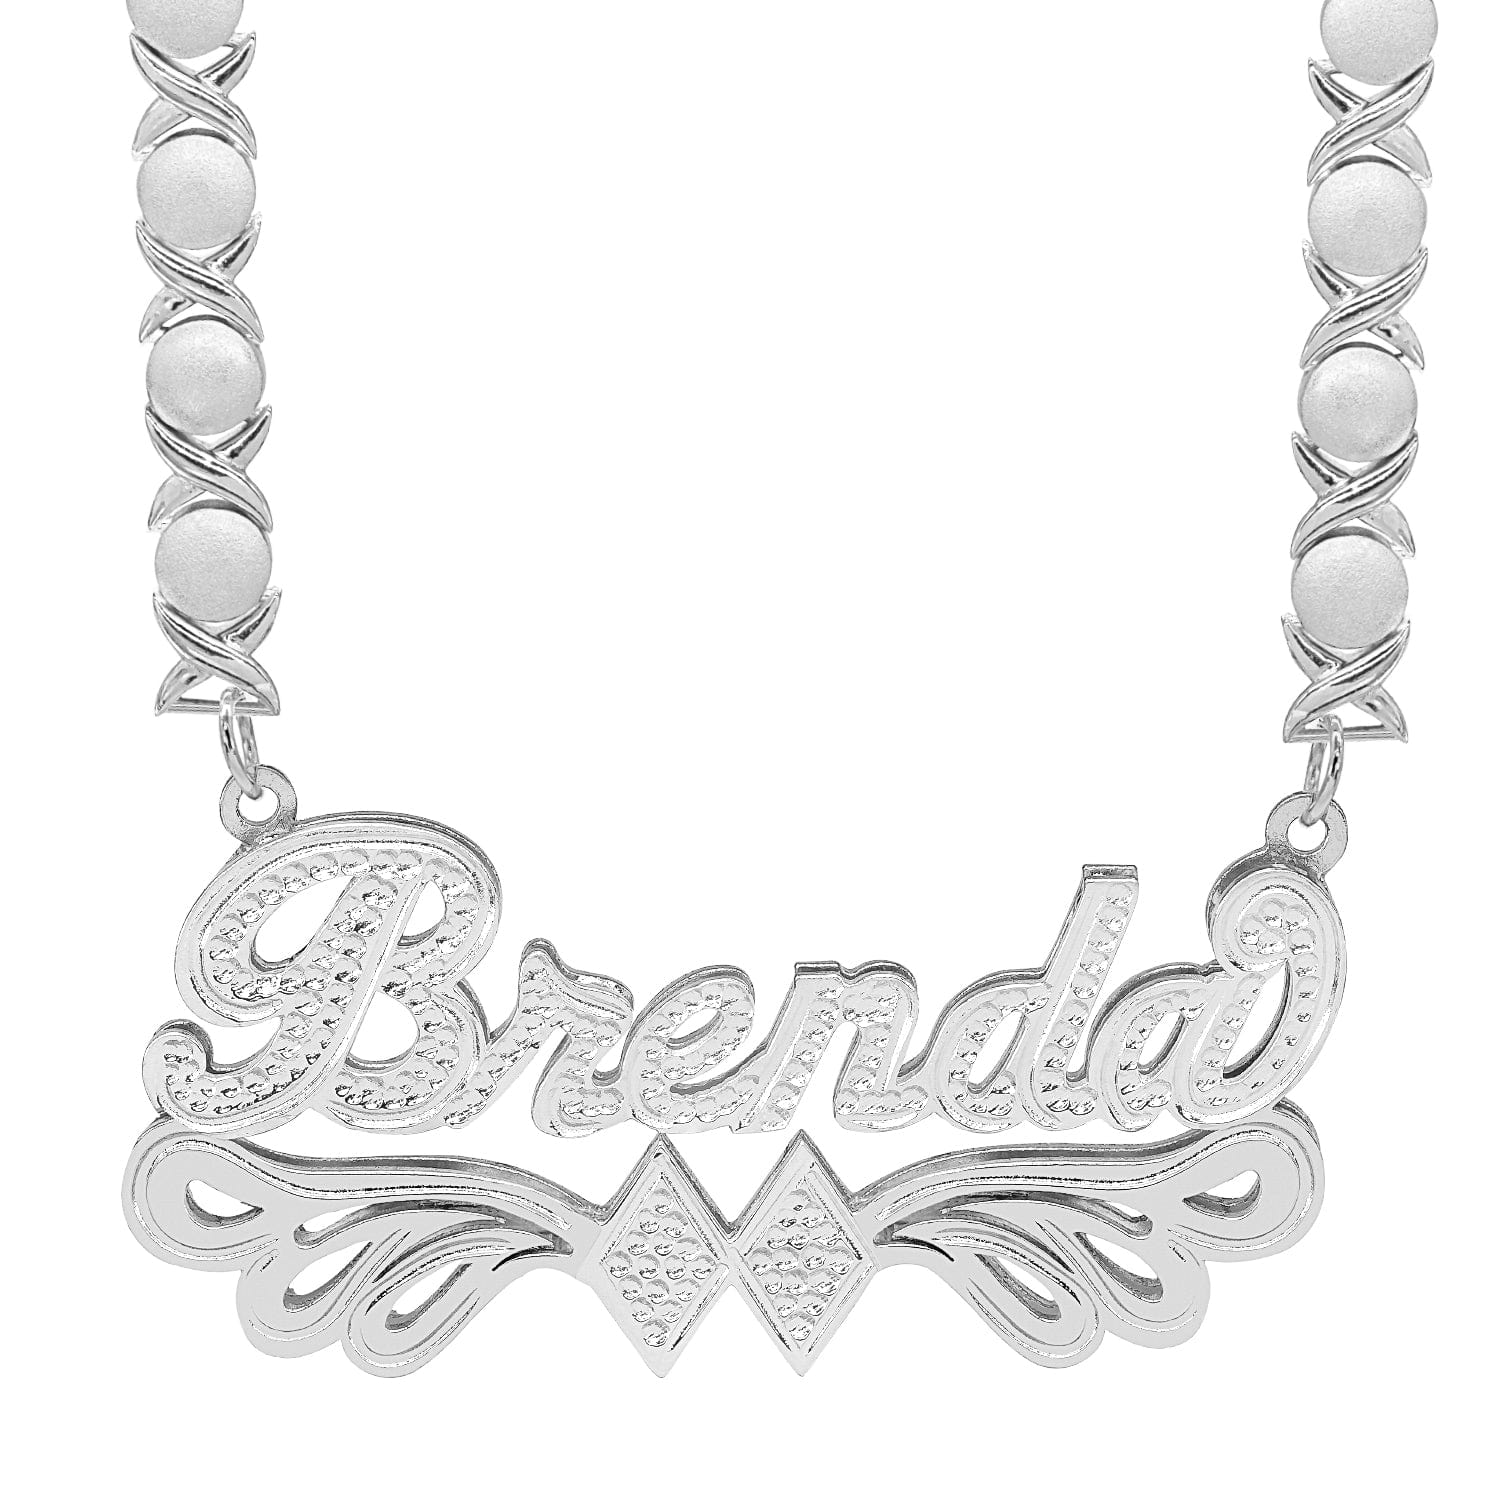 14K Gold over Sterling Silver / Rhodium Xoxo Chain Double Plated Name Necklace "Brenda" with Rhodium Xoxo Chain